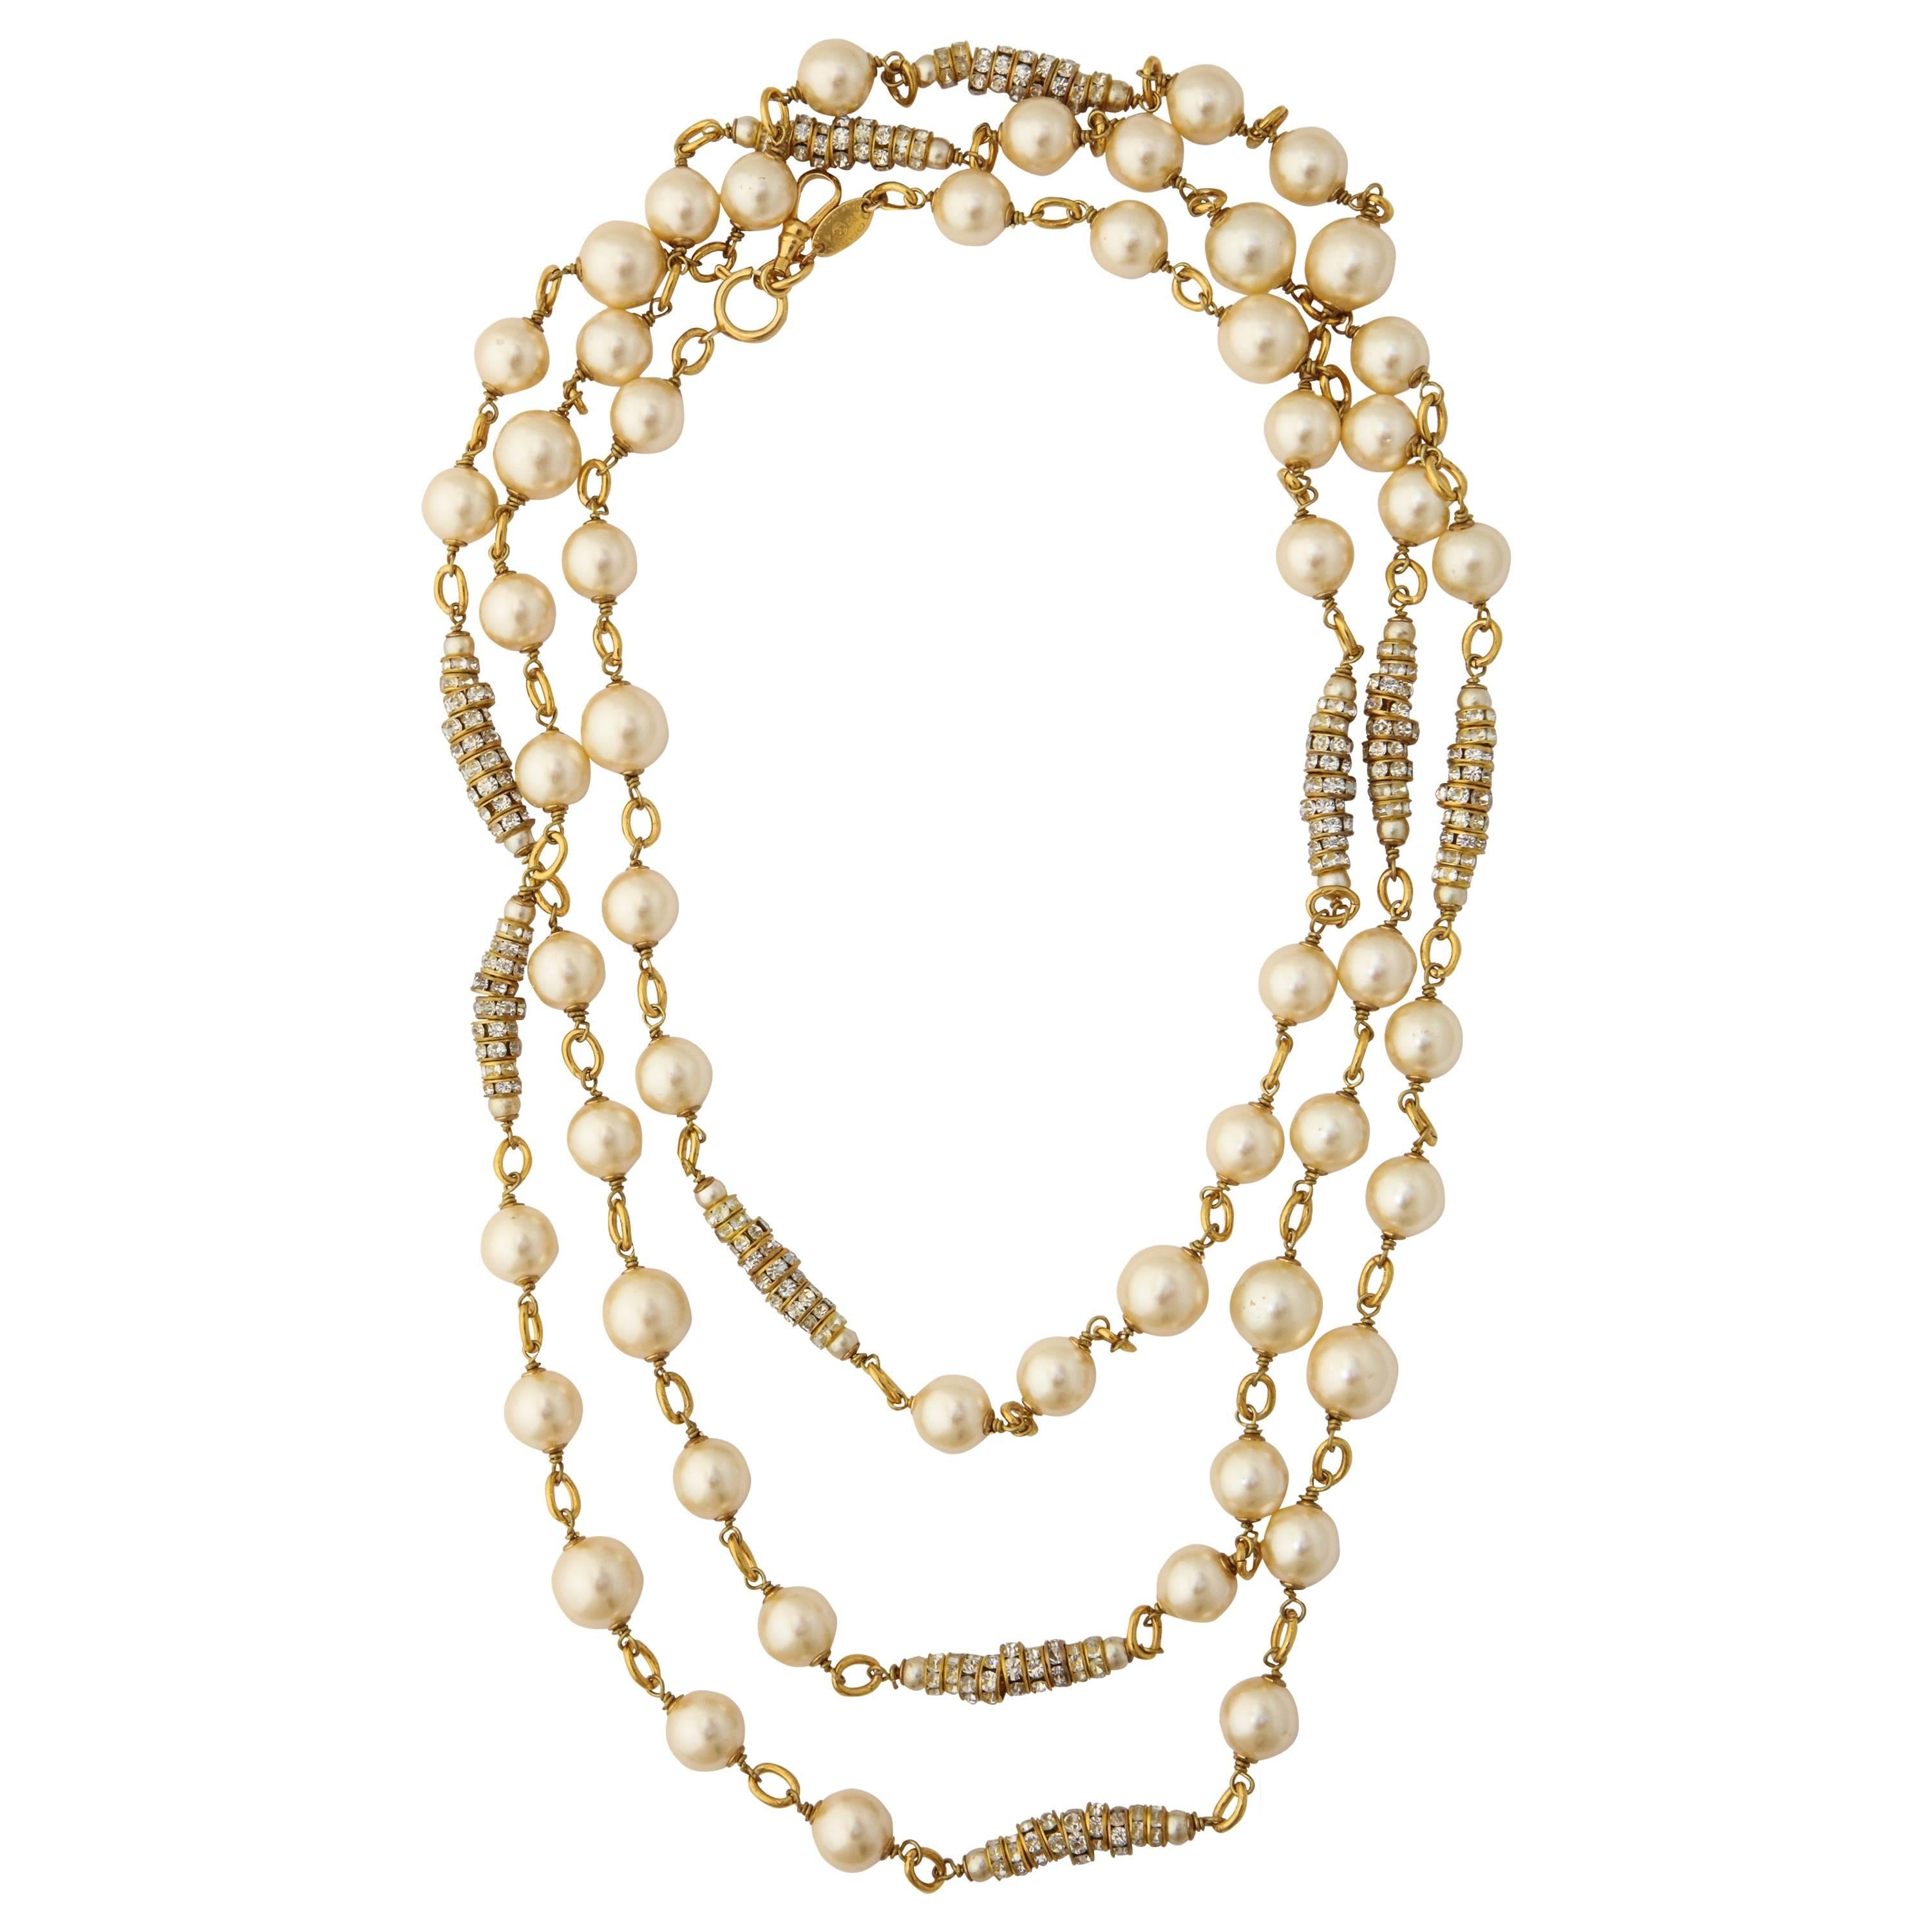 Long Chanel Faux Pearl and Glass Necklace